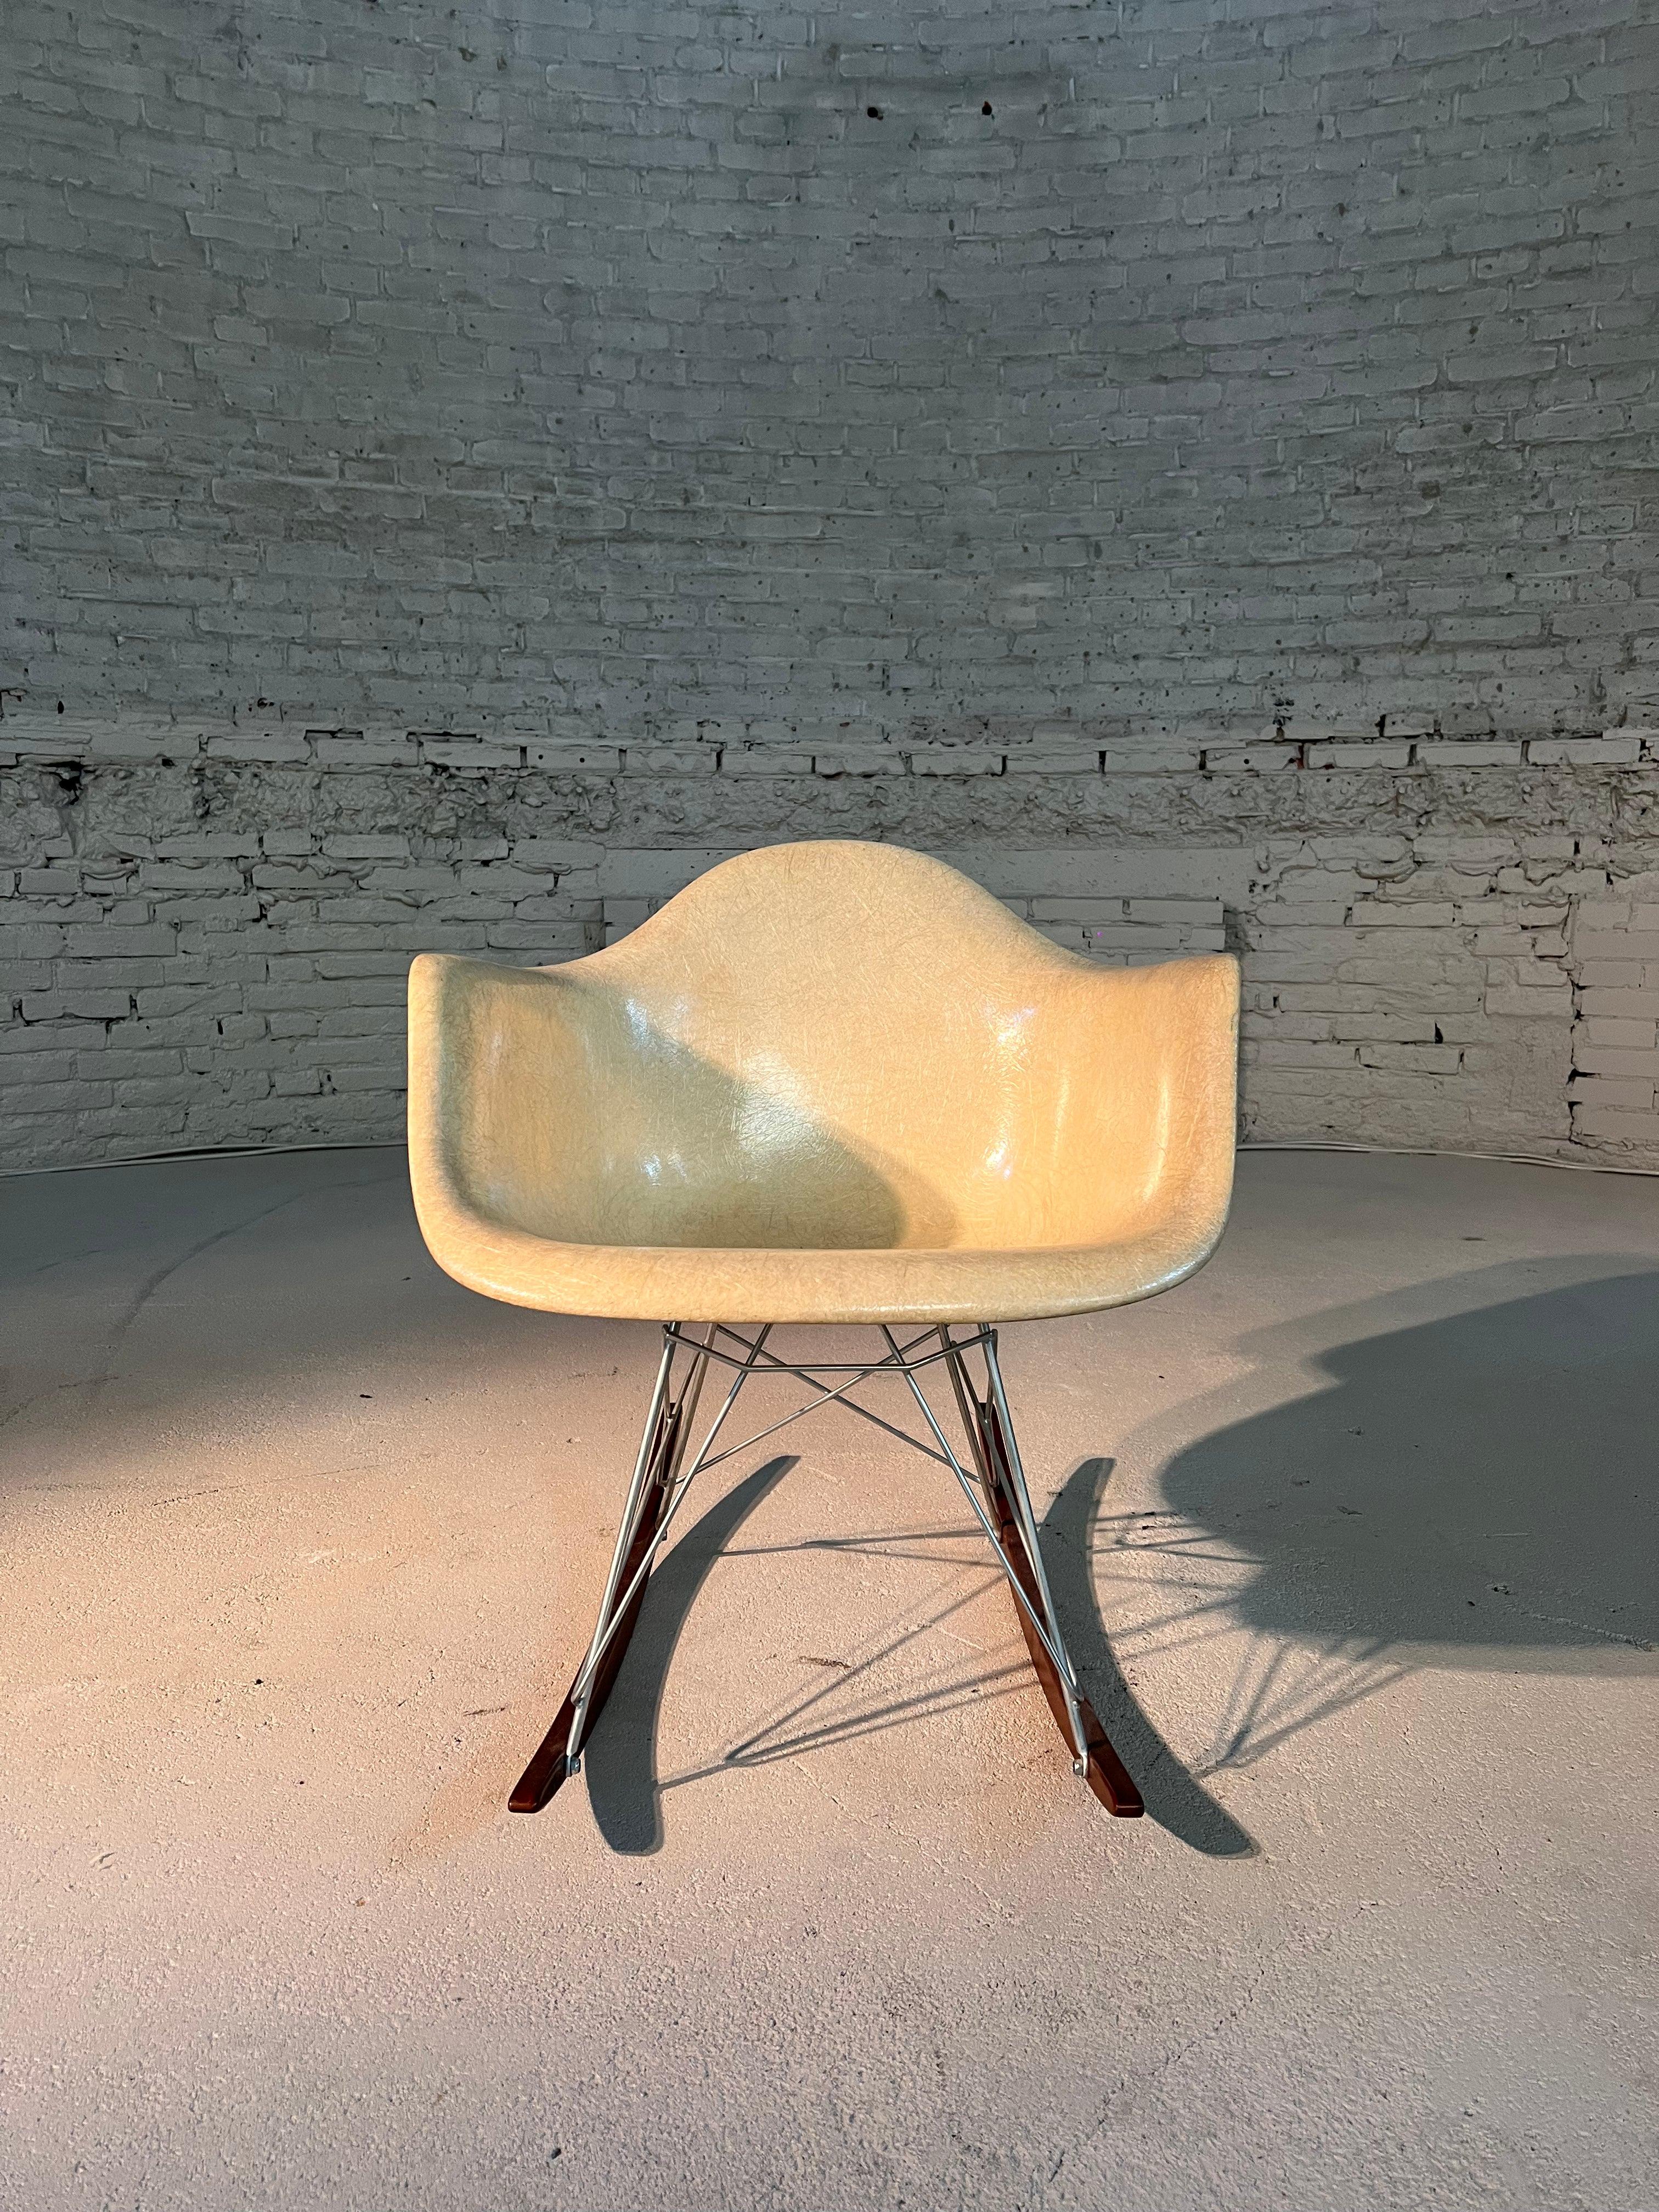 Charles Eames Zenit RAR Rocker Chair, First Edition Rope Edge, Color Lemon.

This chair is in mint condition, build in 1948-1954 by Herman Miller Zenith. Rope edged fiberglass shell, zinc Eiffel tower base and birchwood rockers. All original parts,